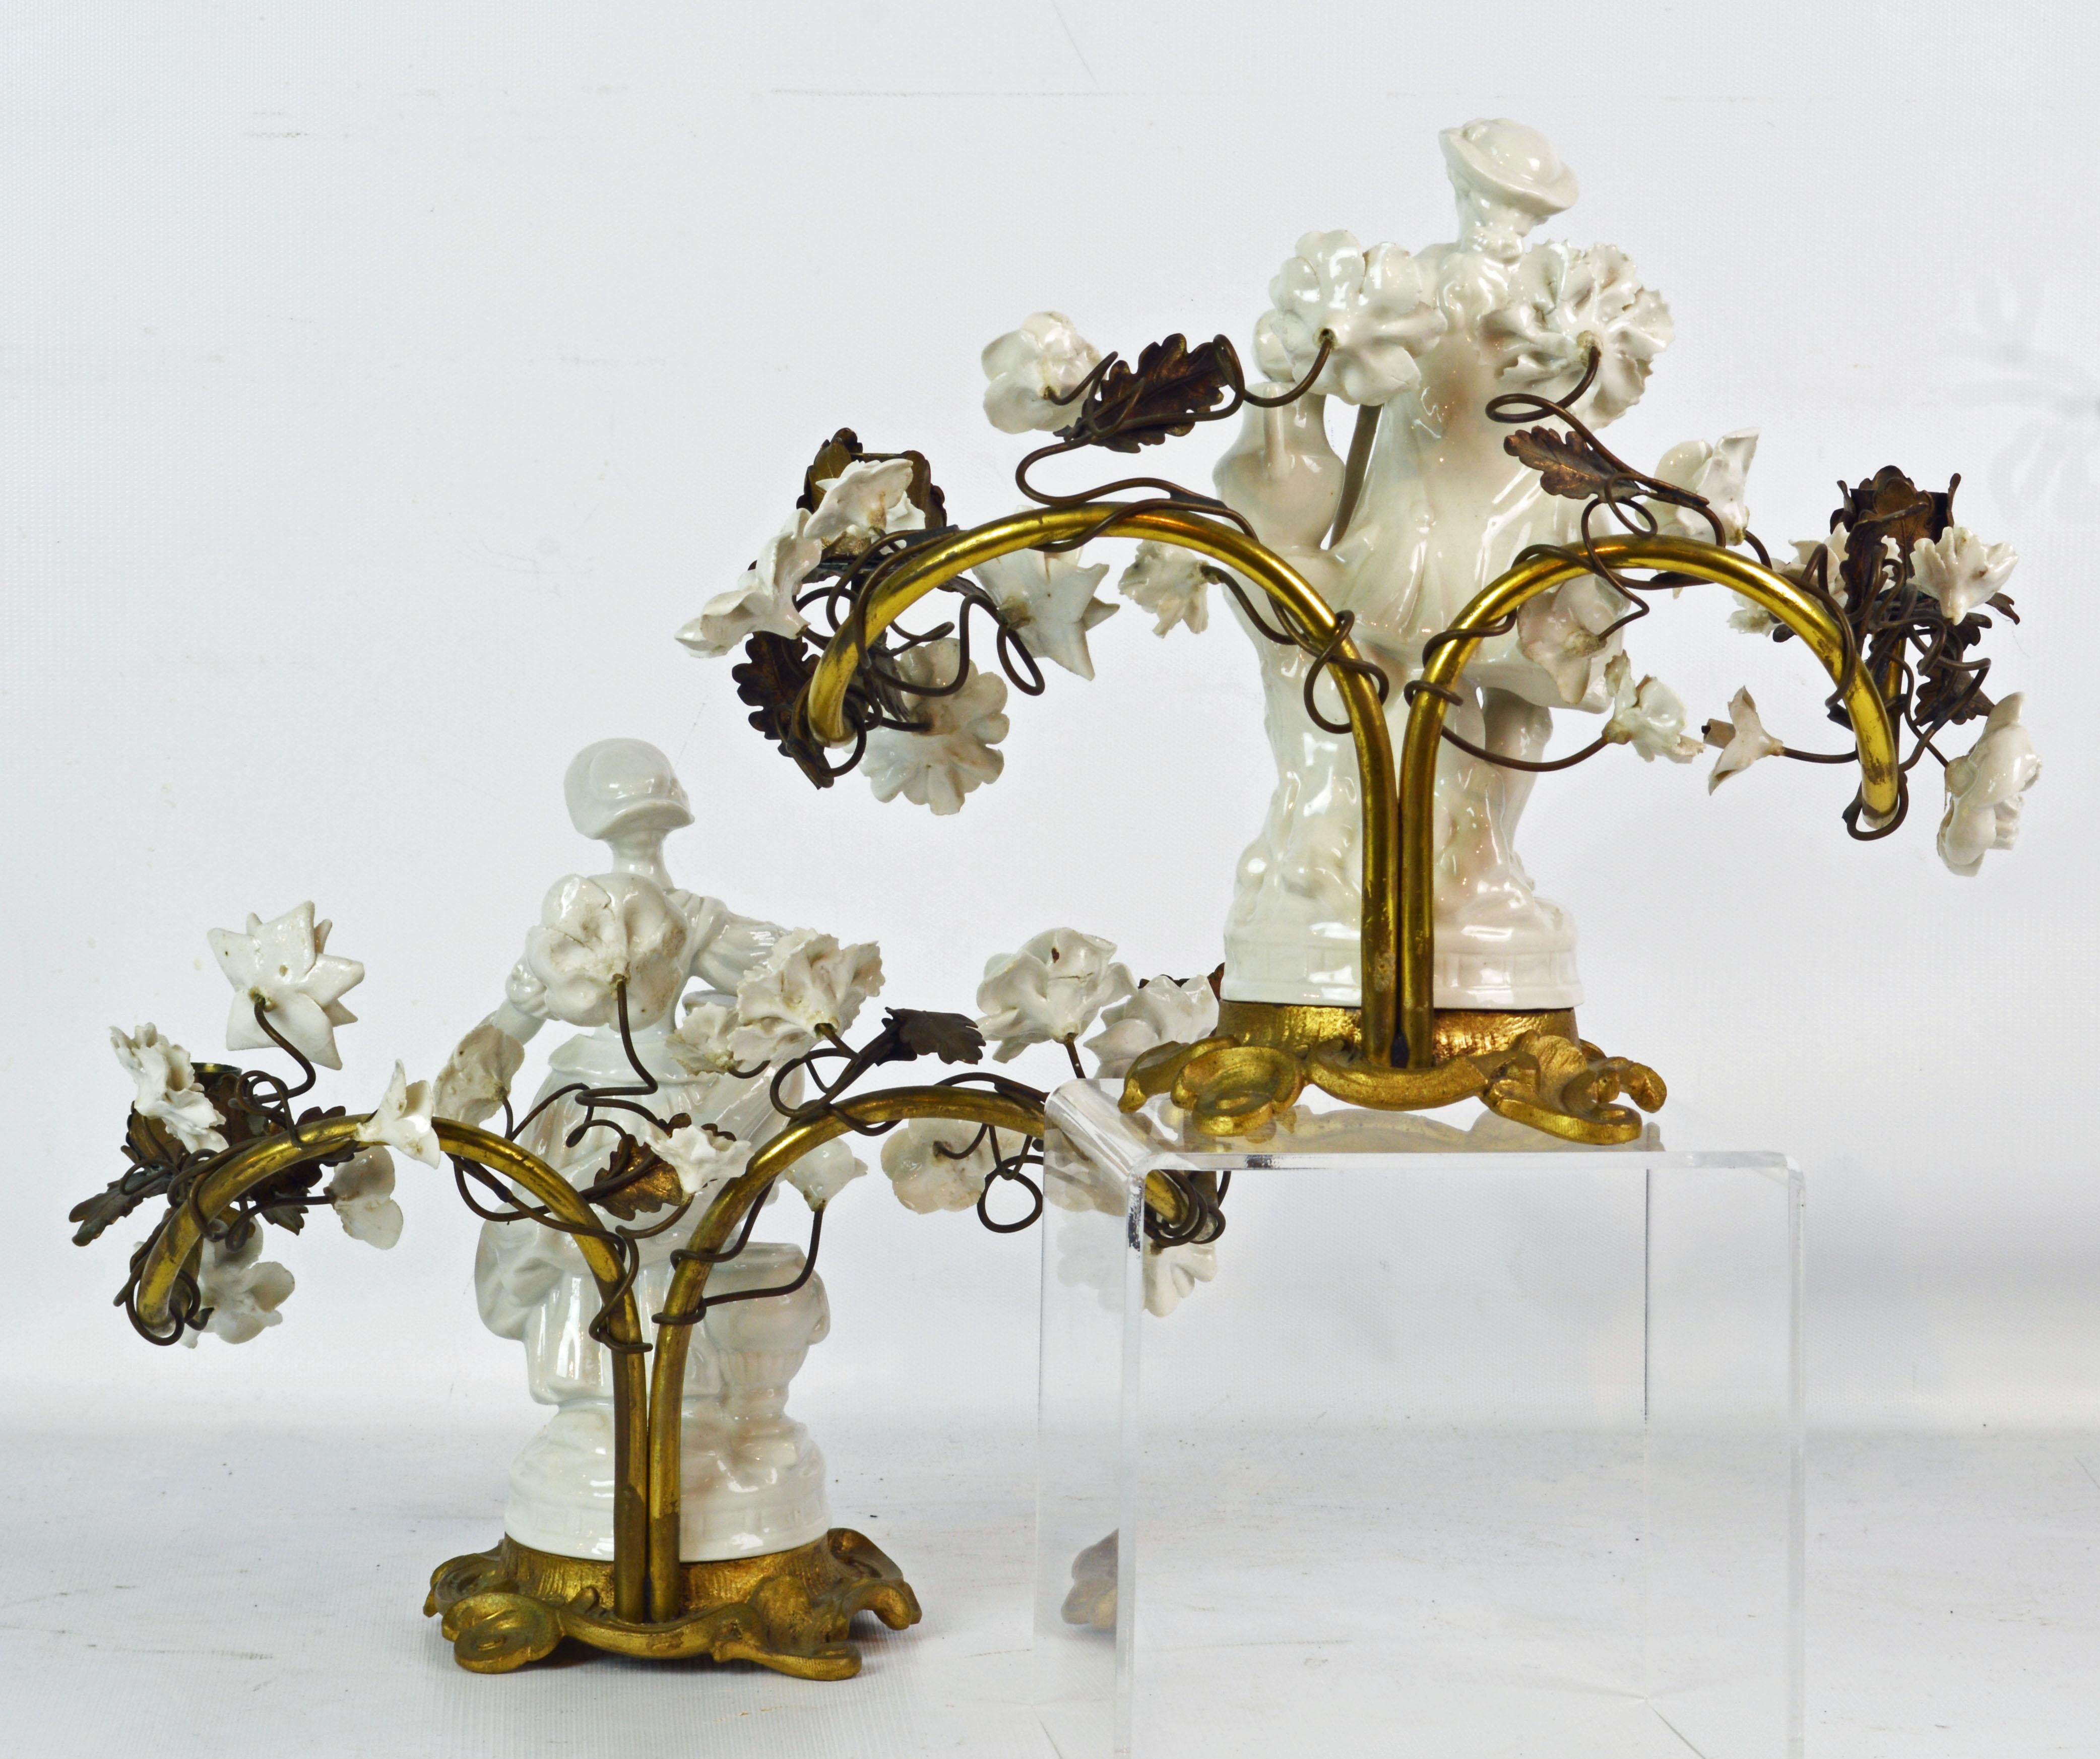 Rococo Pair of Sevres Style Figural Blanc de Chine and Gilt Bronze Flower Candelabras